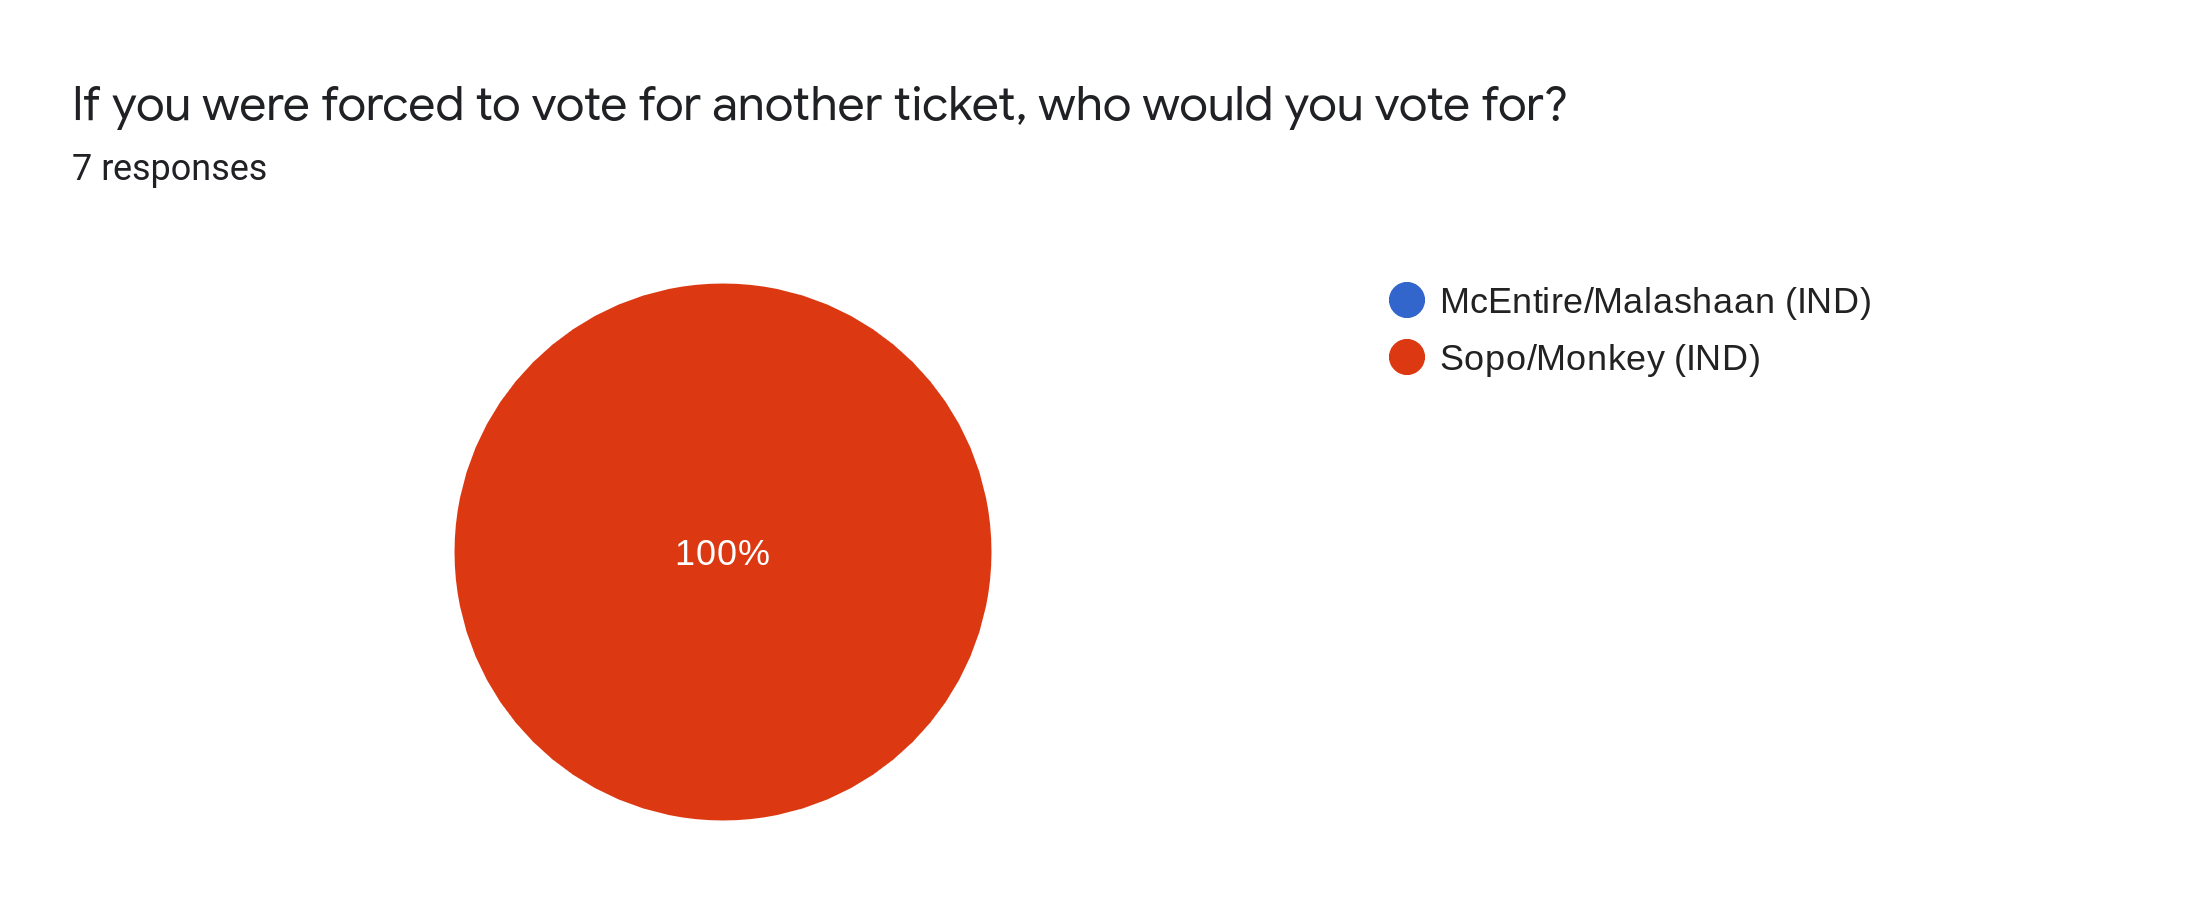 Forms response chart. Question title: If you were forced to vote for another ticket, who would you vote for?. Number of responses: 7 responses.